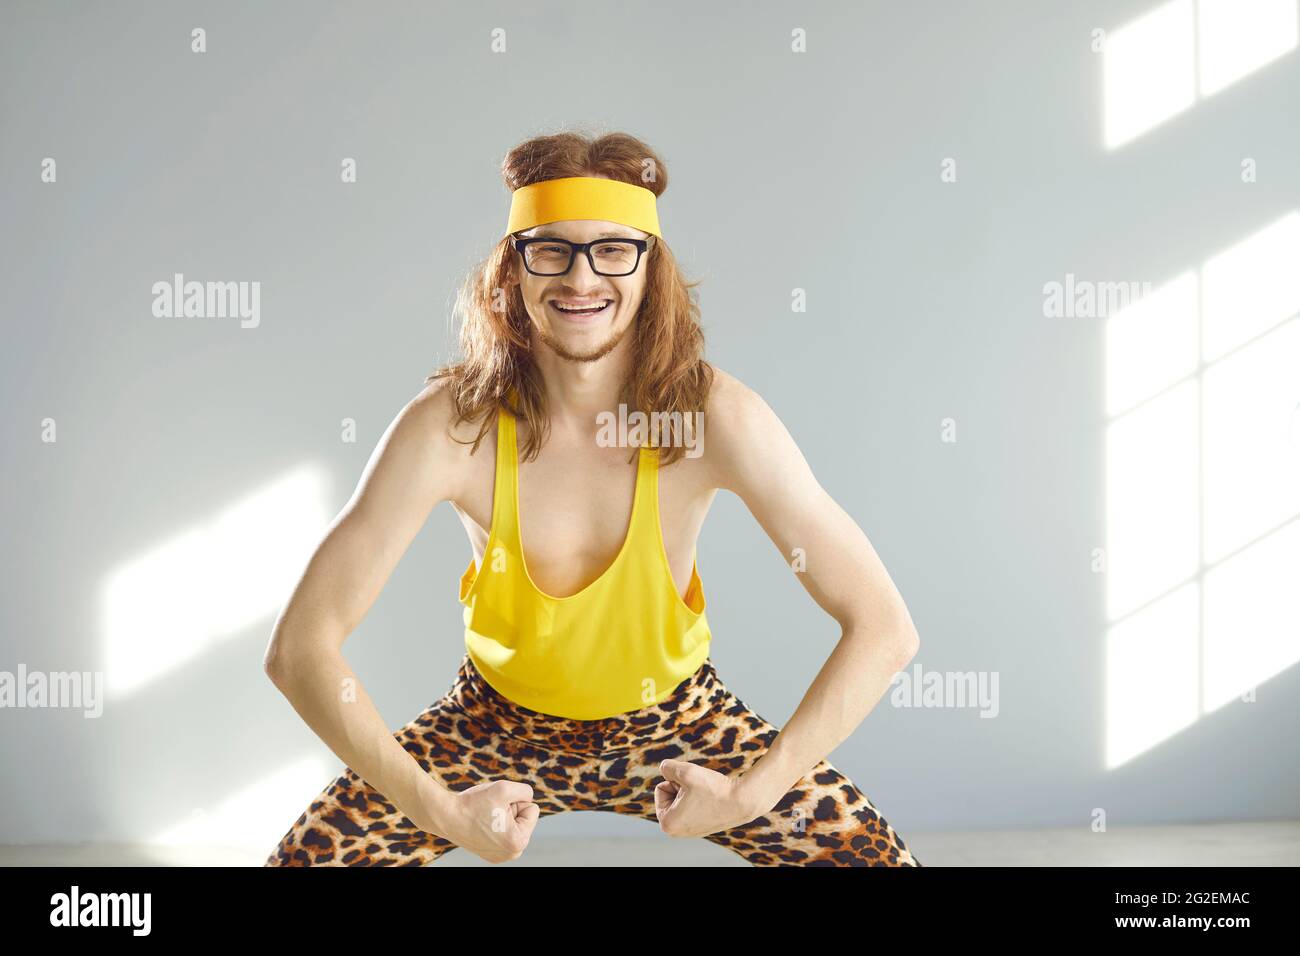 Happy skinny man in funny retro activewear smiling and showing his weak arm muscles Stock Photo